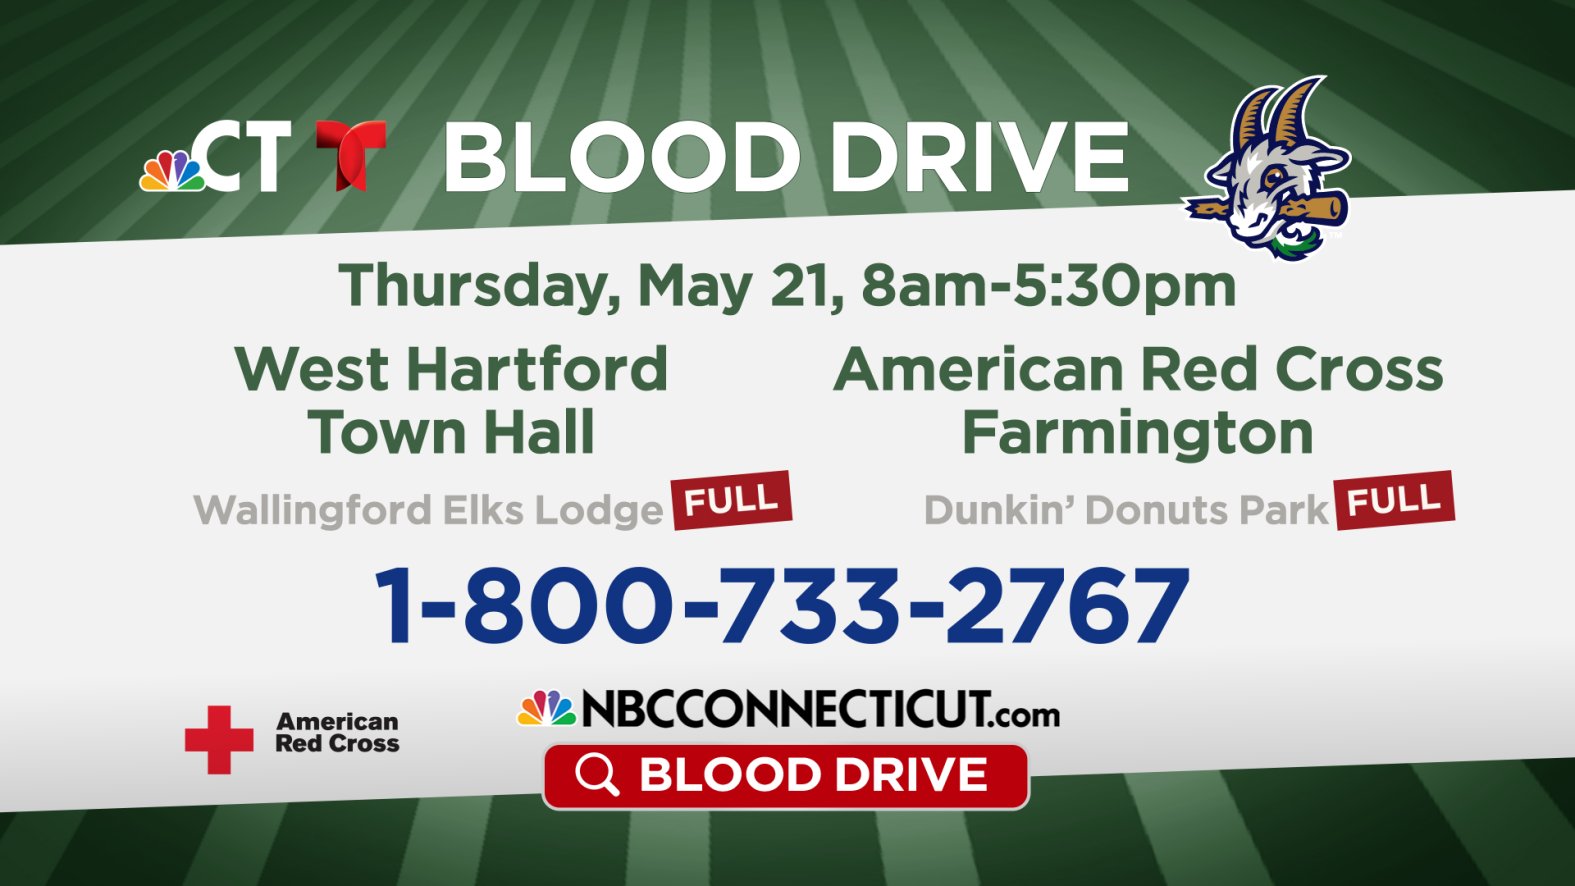 Help Save Lives And Donate Blood During The State’s Largest Blood Drive